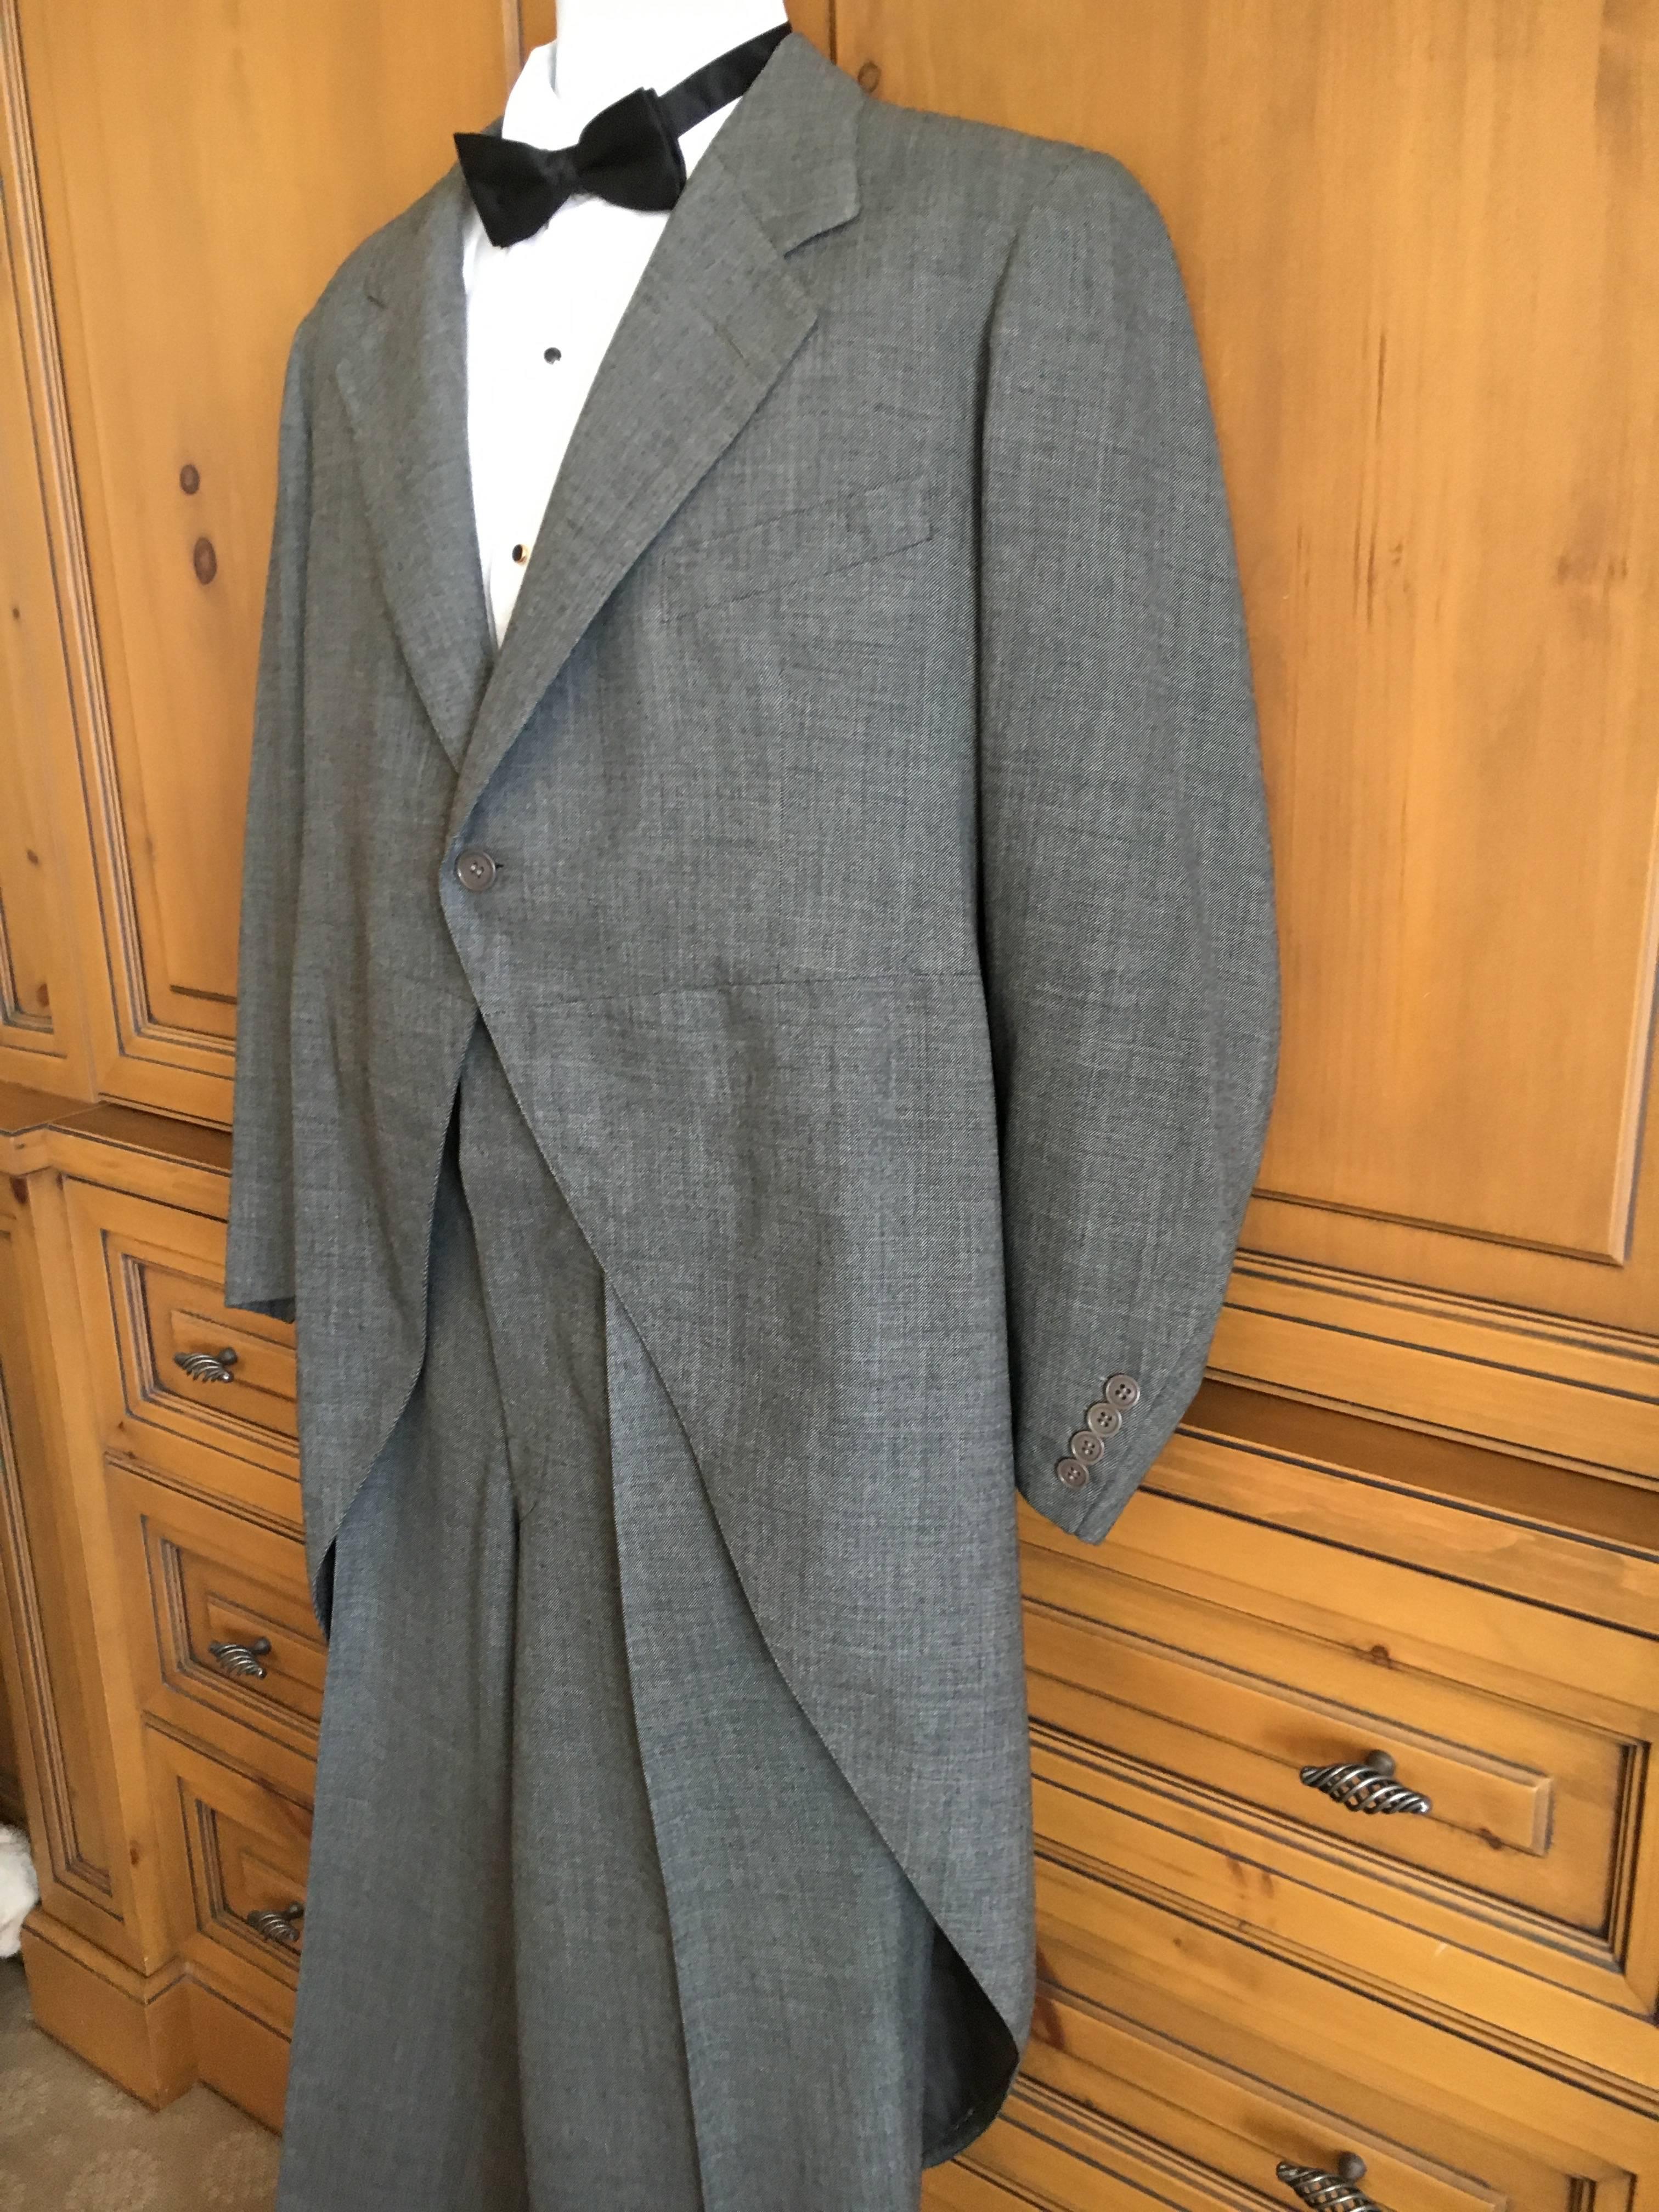 1941 Men's Gray Formal Cutaway Tailcoat Suit Dunne & Co. For Sale 4